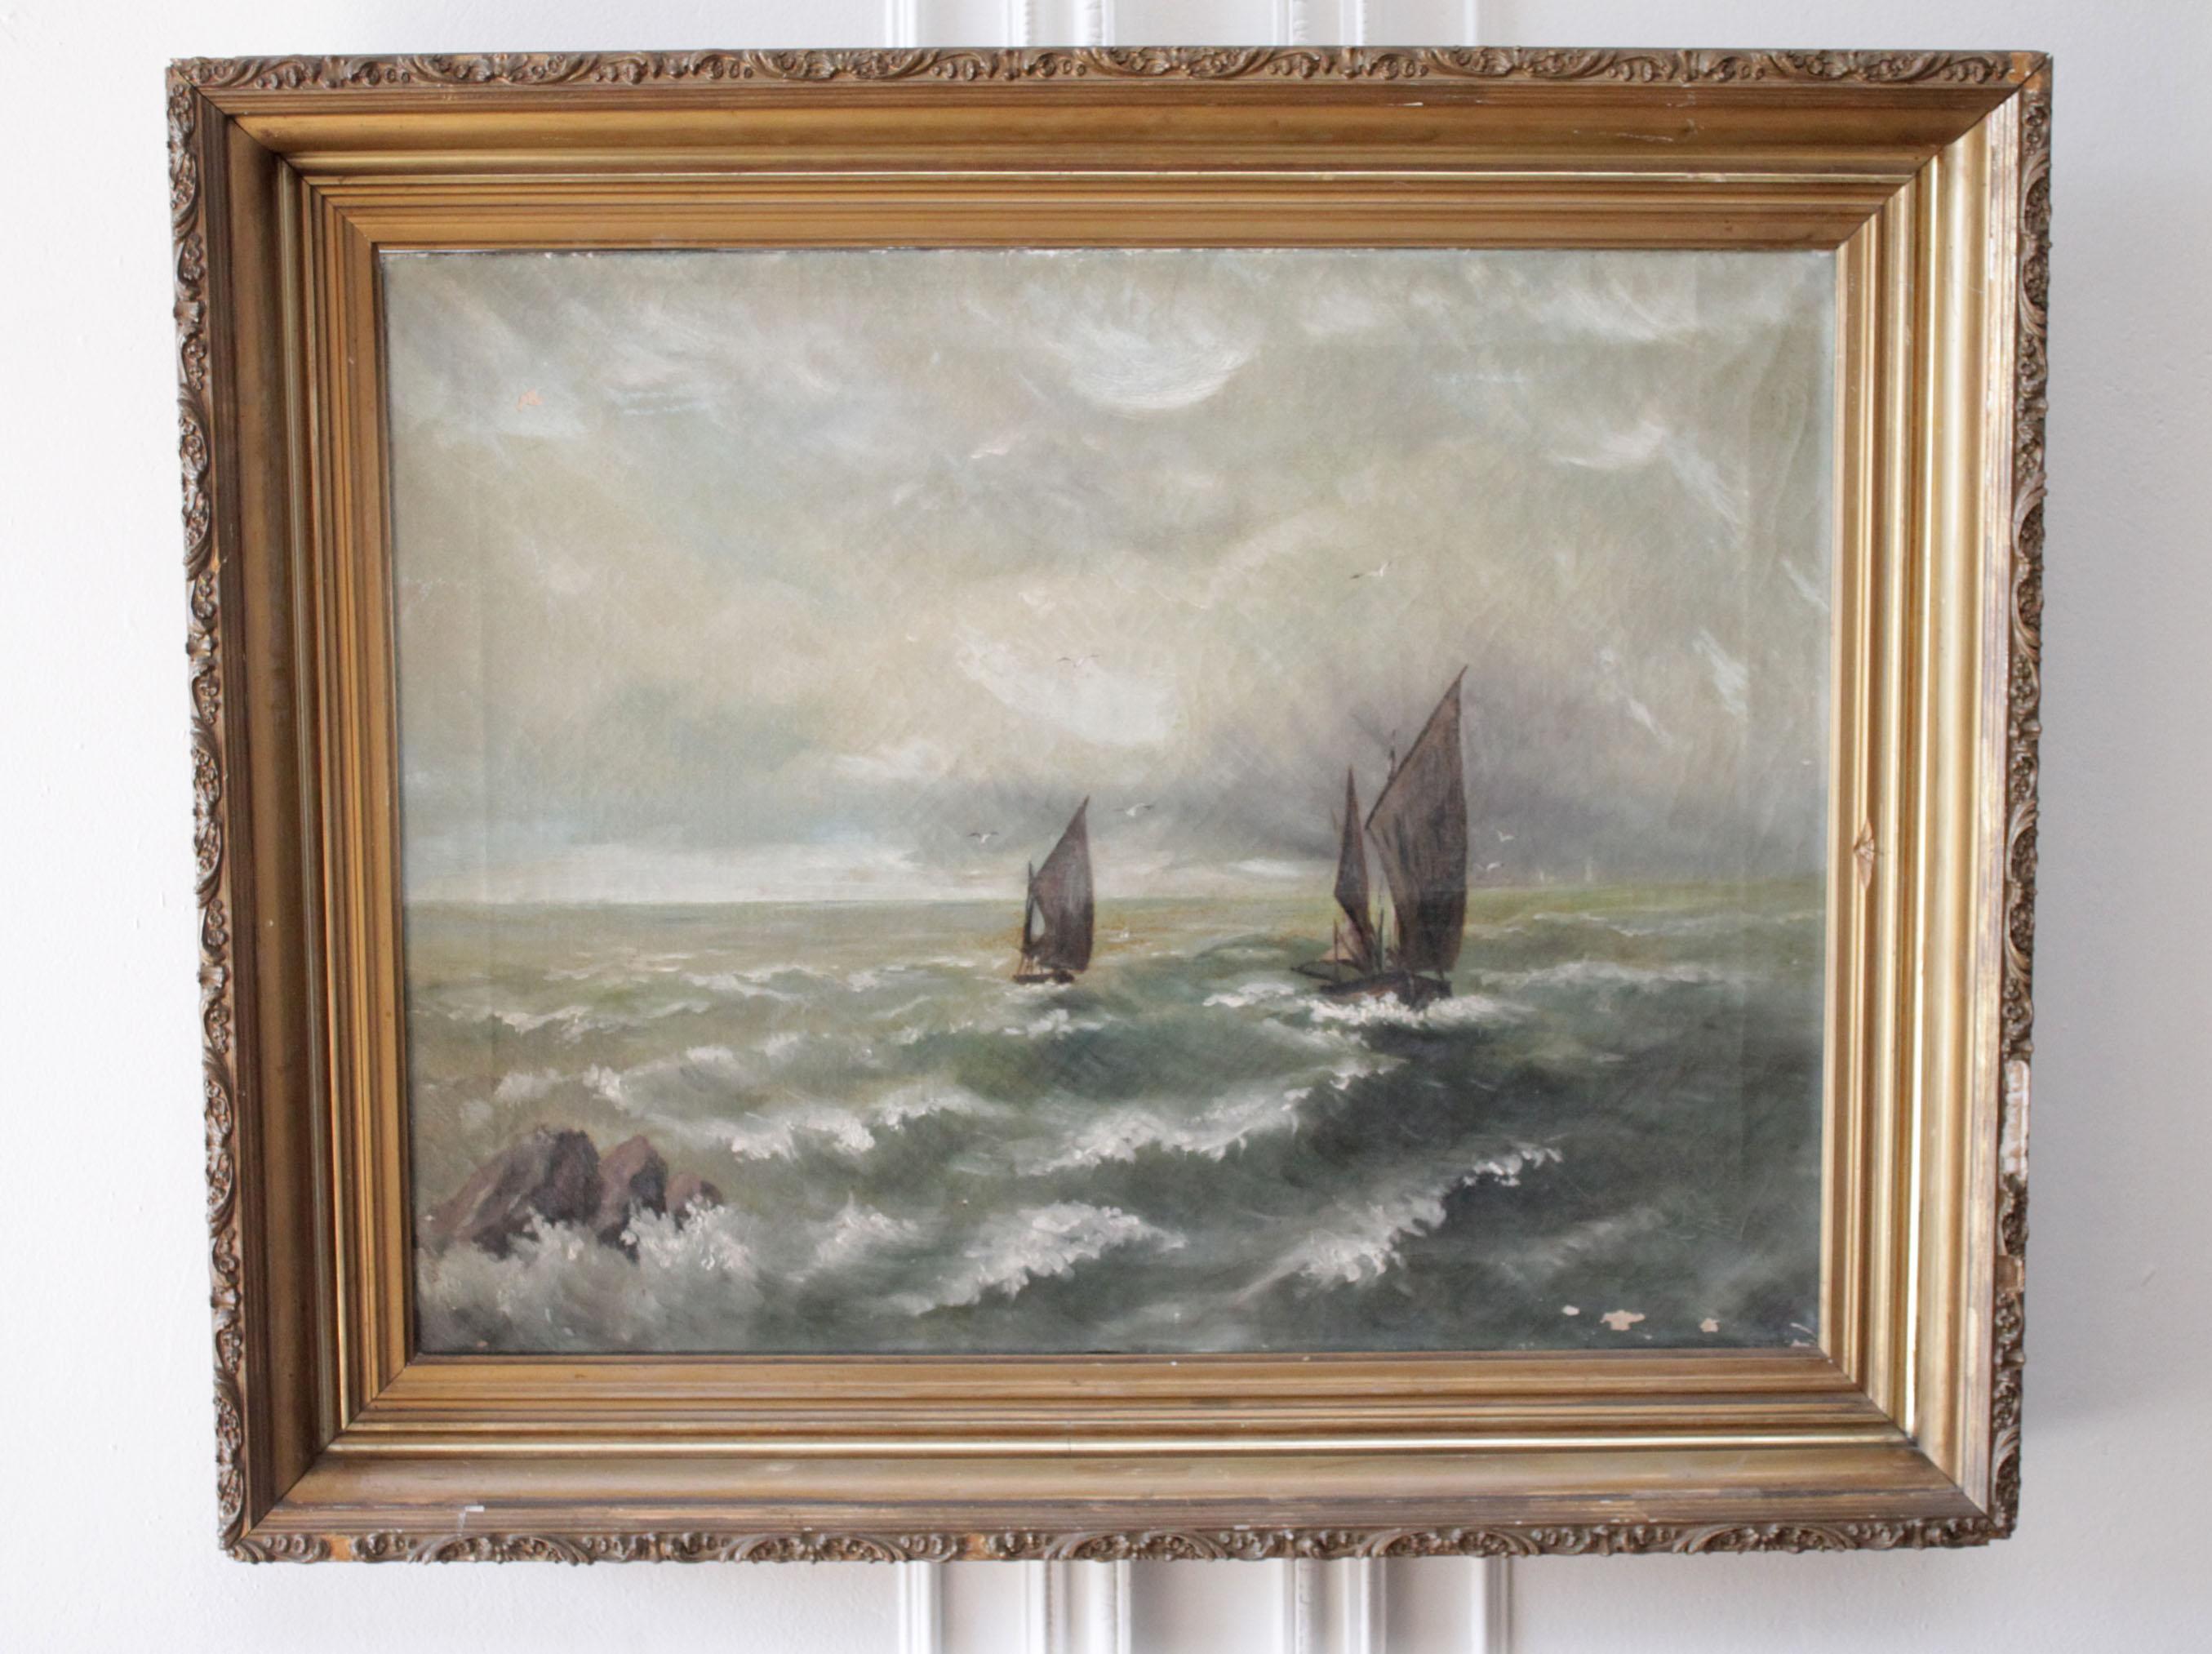 Antique oil painting of boat at sea in giltwood frame
Unsigned, this oil painting on canvas is framed in a chippy, giltwood frame.
The oil does have age signs with some peeling and fading.
We have not cleaned this item, we are selling as